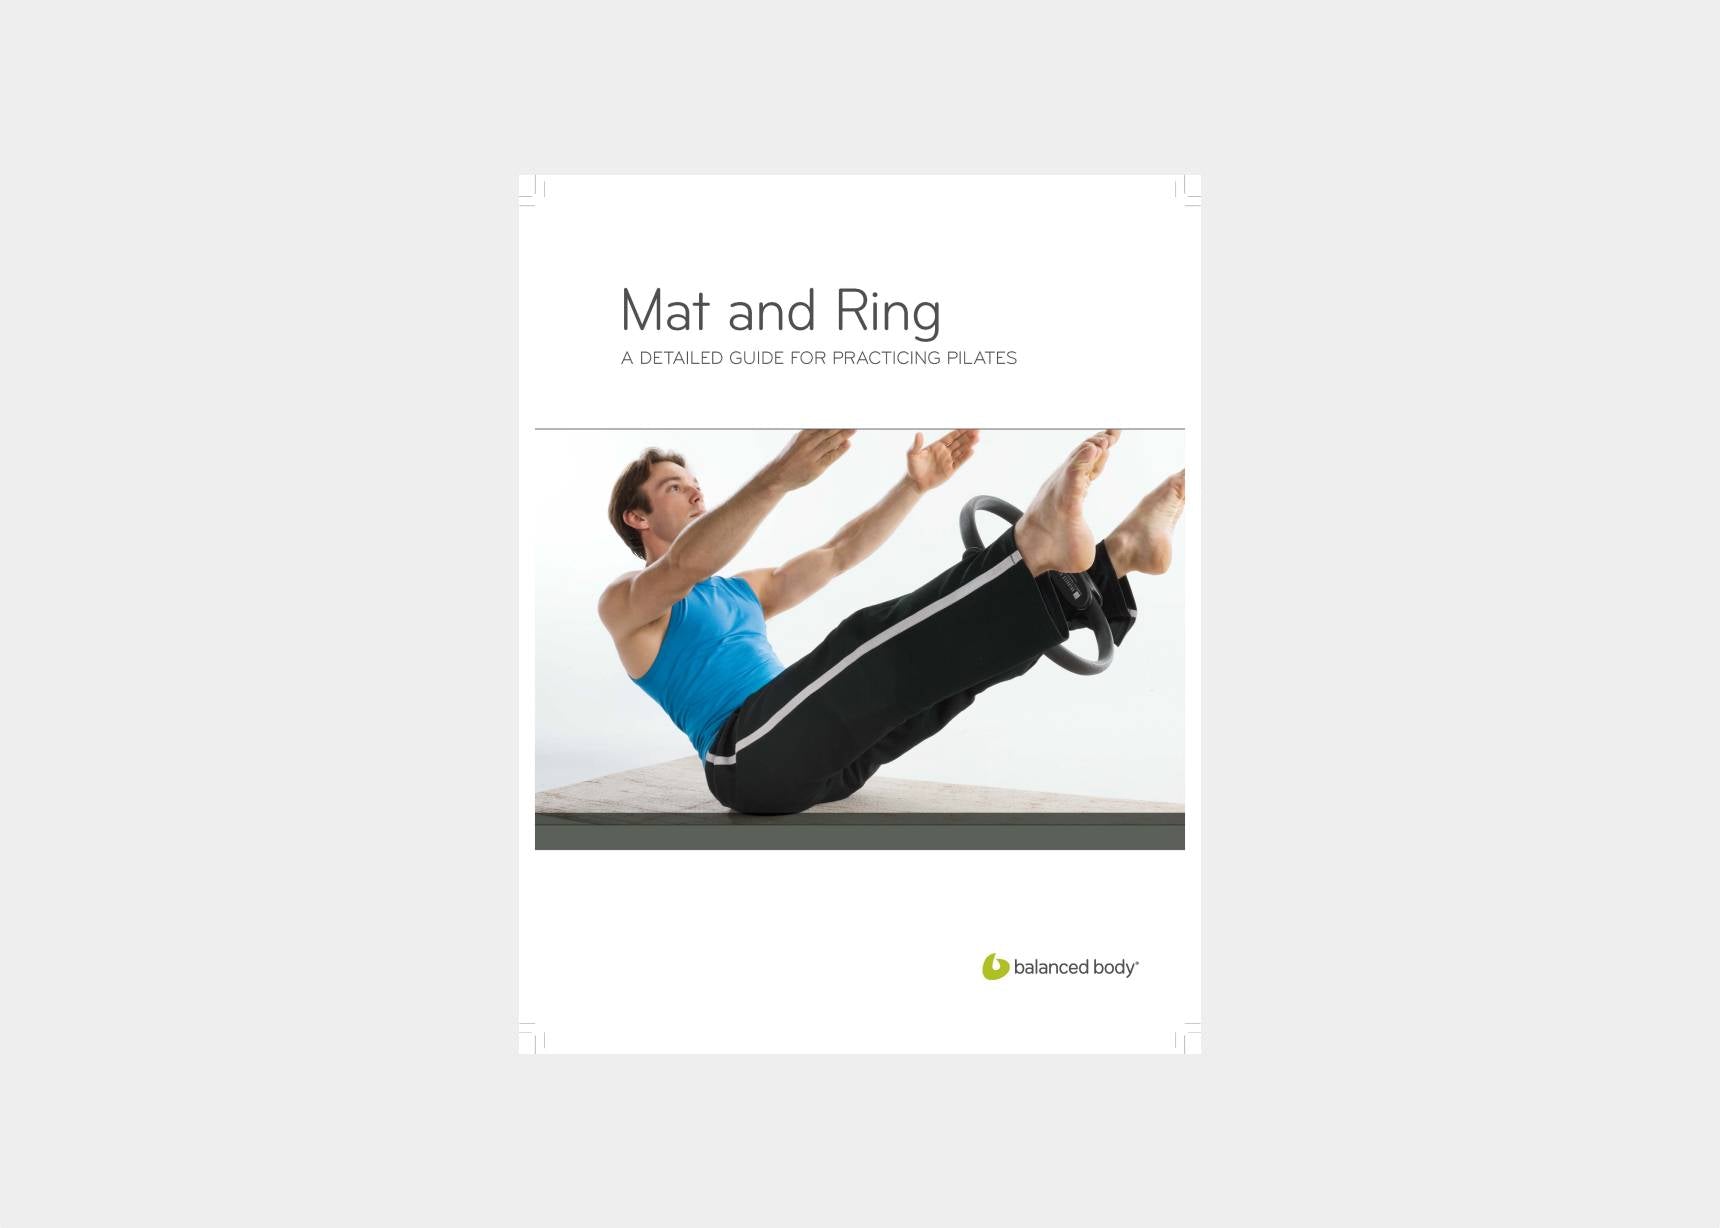 Balanced Body's detailed guide for Mat and Ring Pilates.